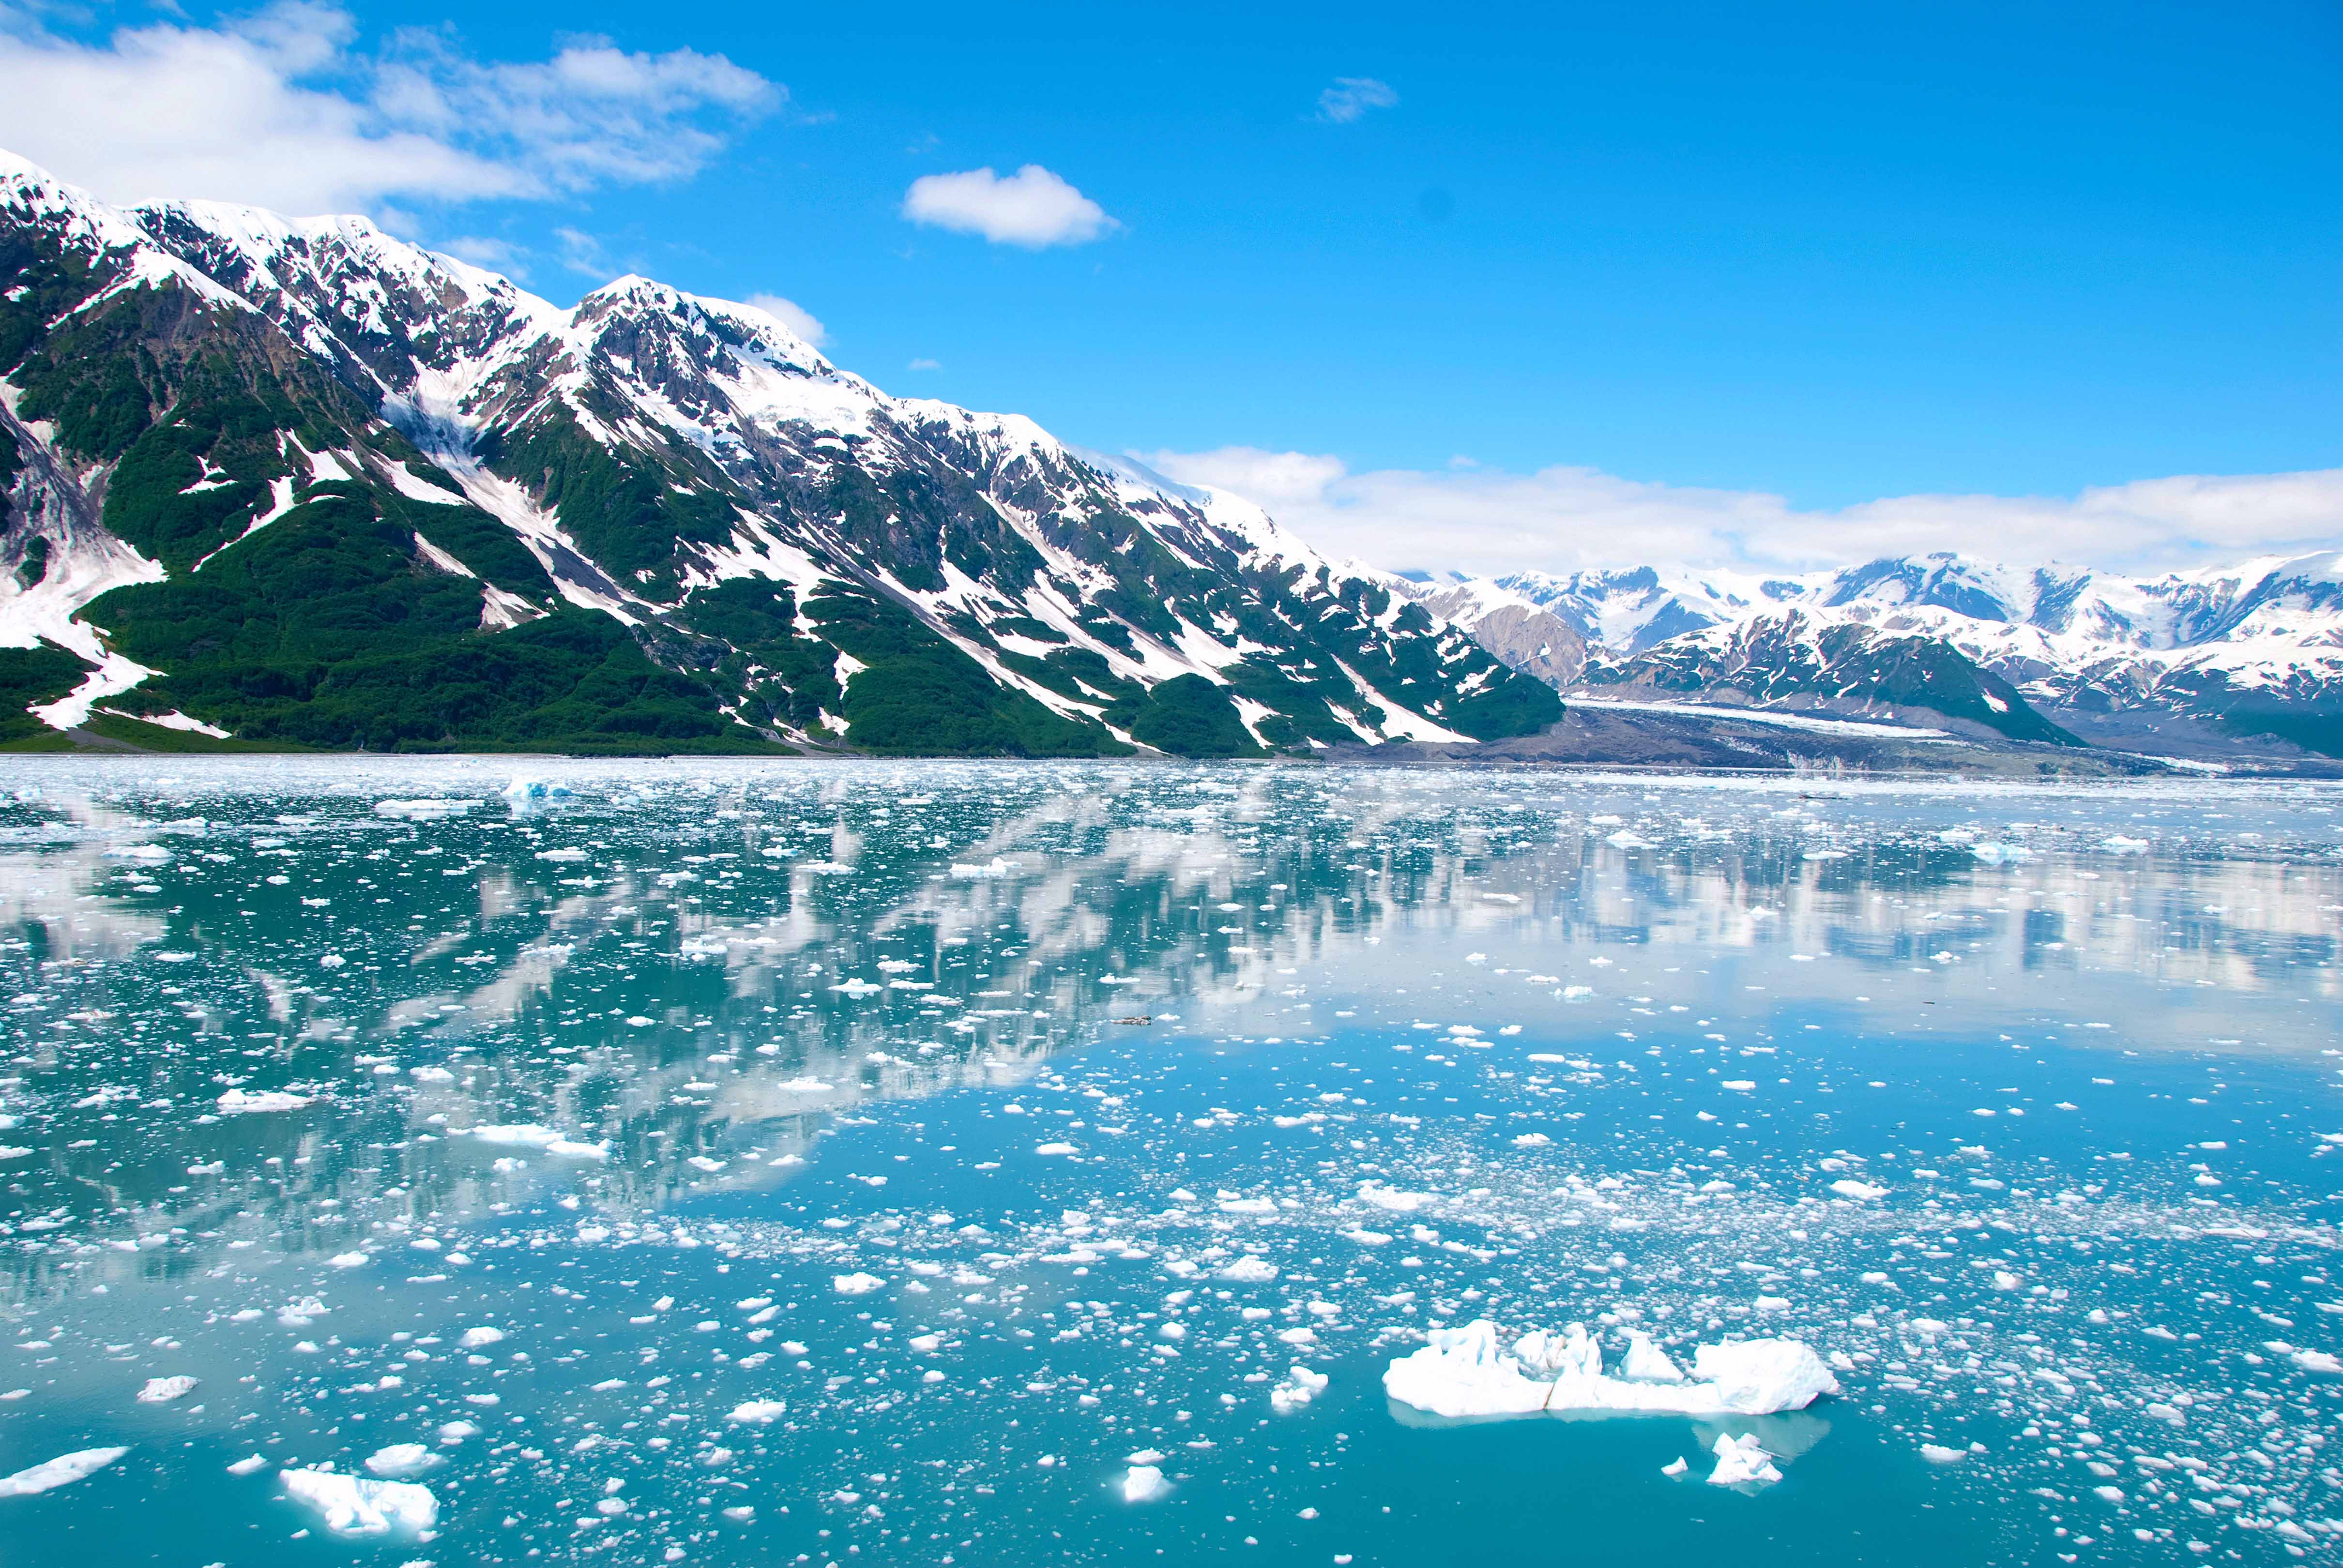 What to expect when cruising Alaska